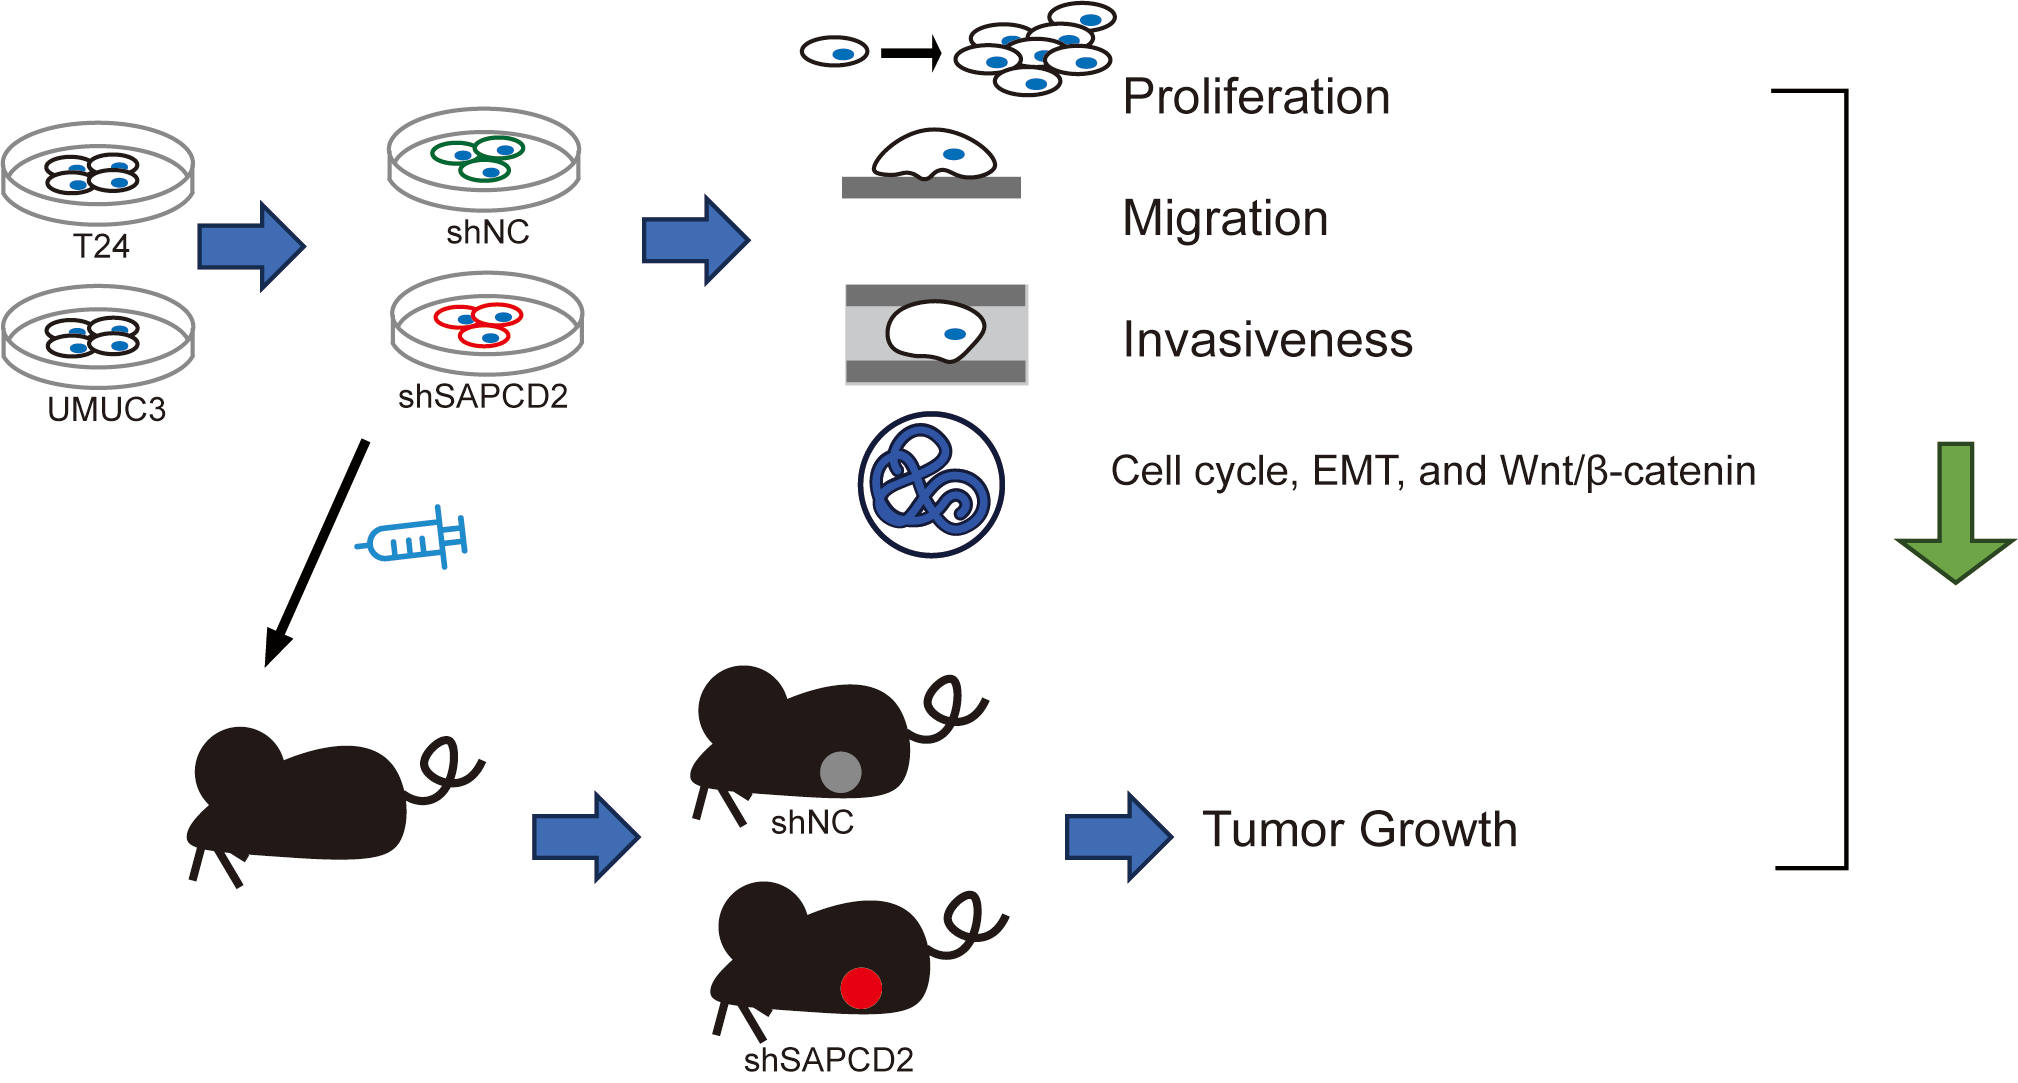 Inhibition of proliferation, migration, and invasiveness of bladder cancer cells through SAPCD2 knockdown